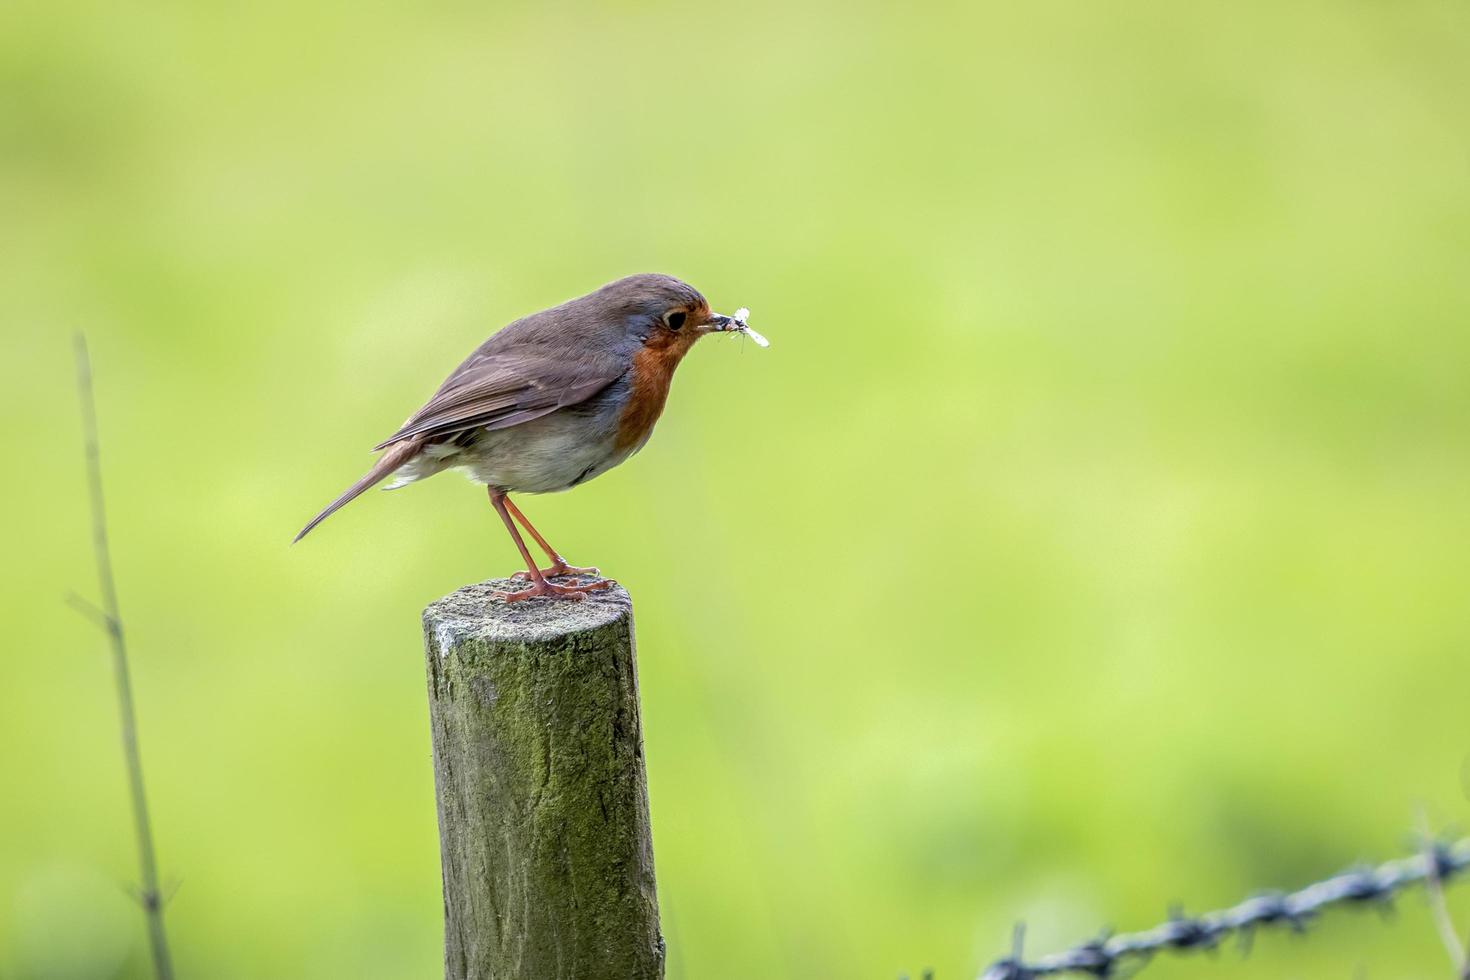 Robin standing on a wooden post having caught an insect photo